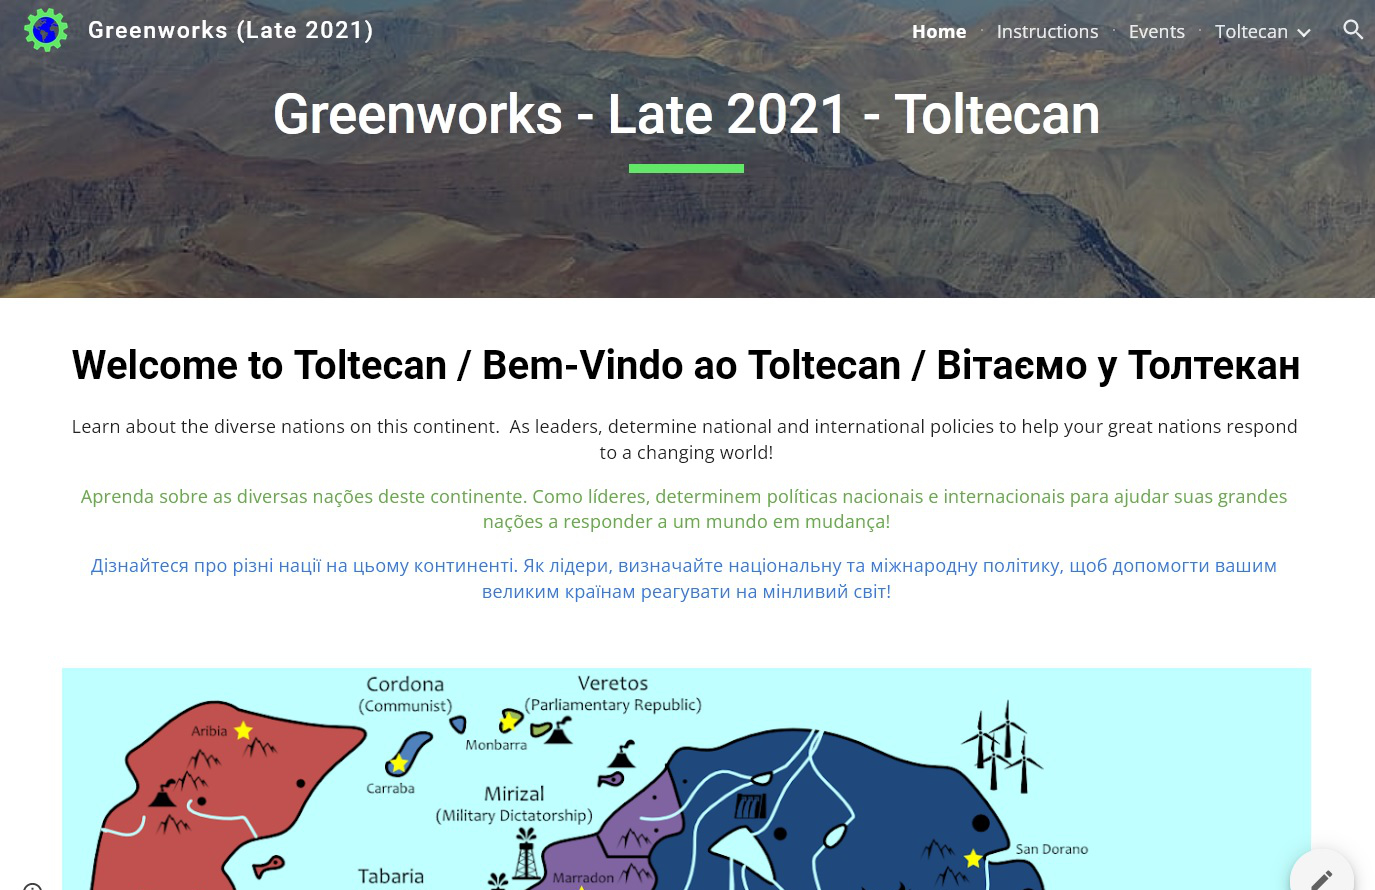 Screenshot of the Google Sites for Greenworks, showing an introduction to the games in three languages (English, Brazilian Portuguese, and Ukrainian) as well as a map of the fictional continent of Toltecan